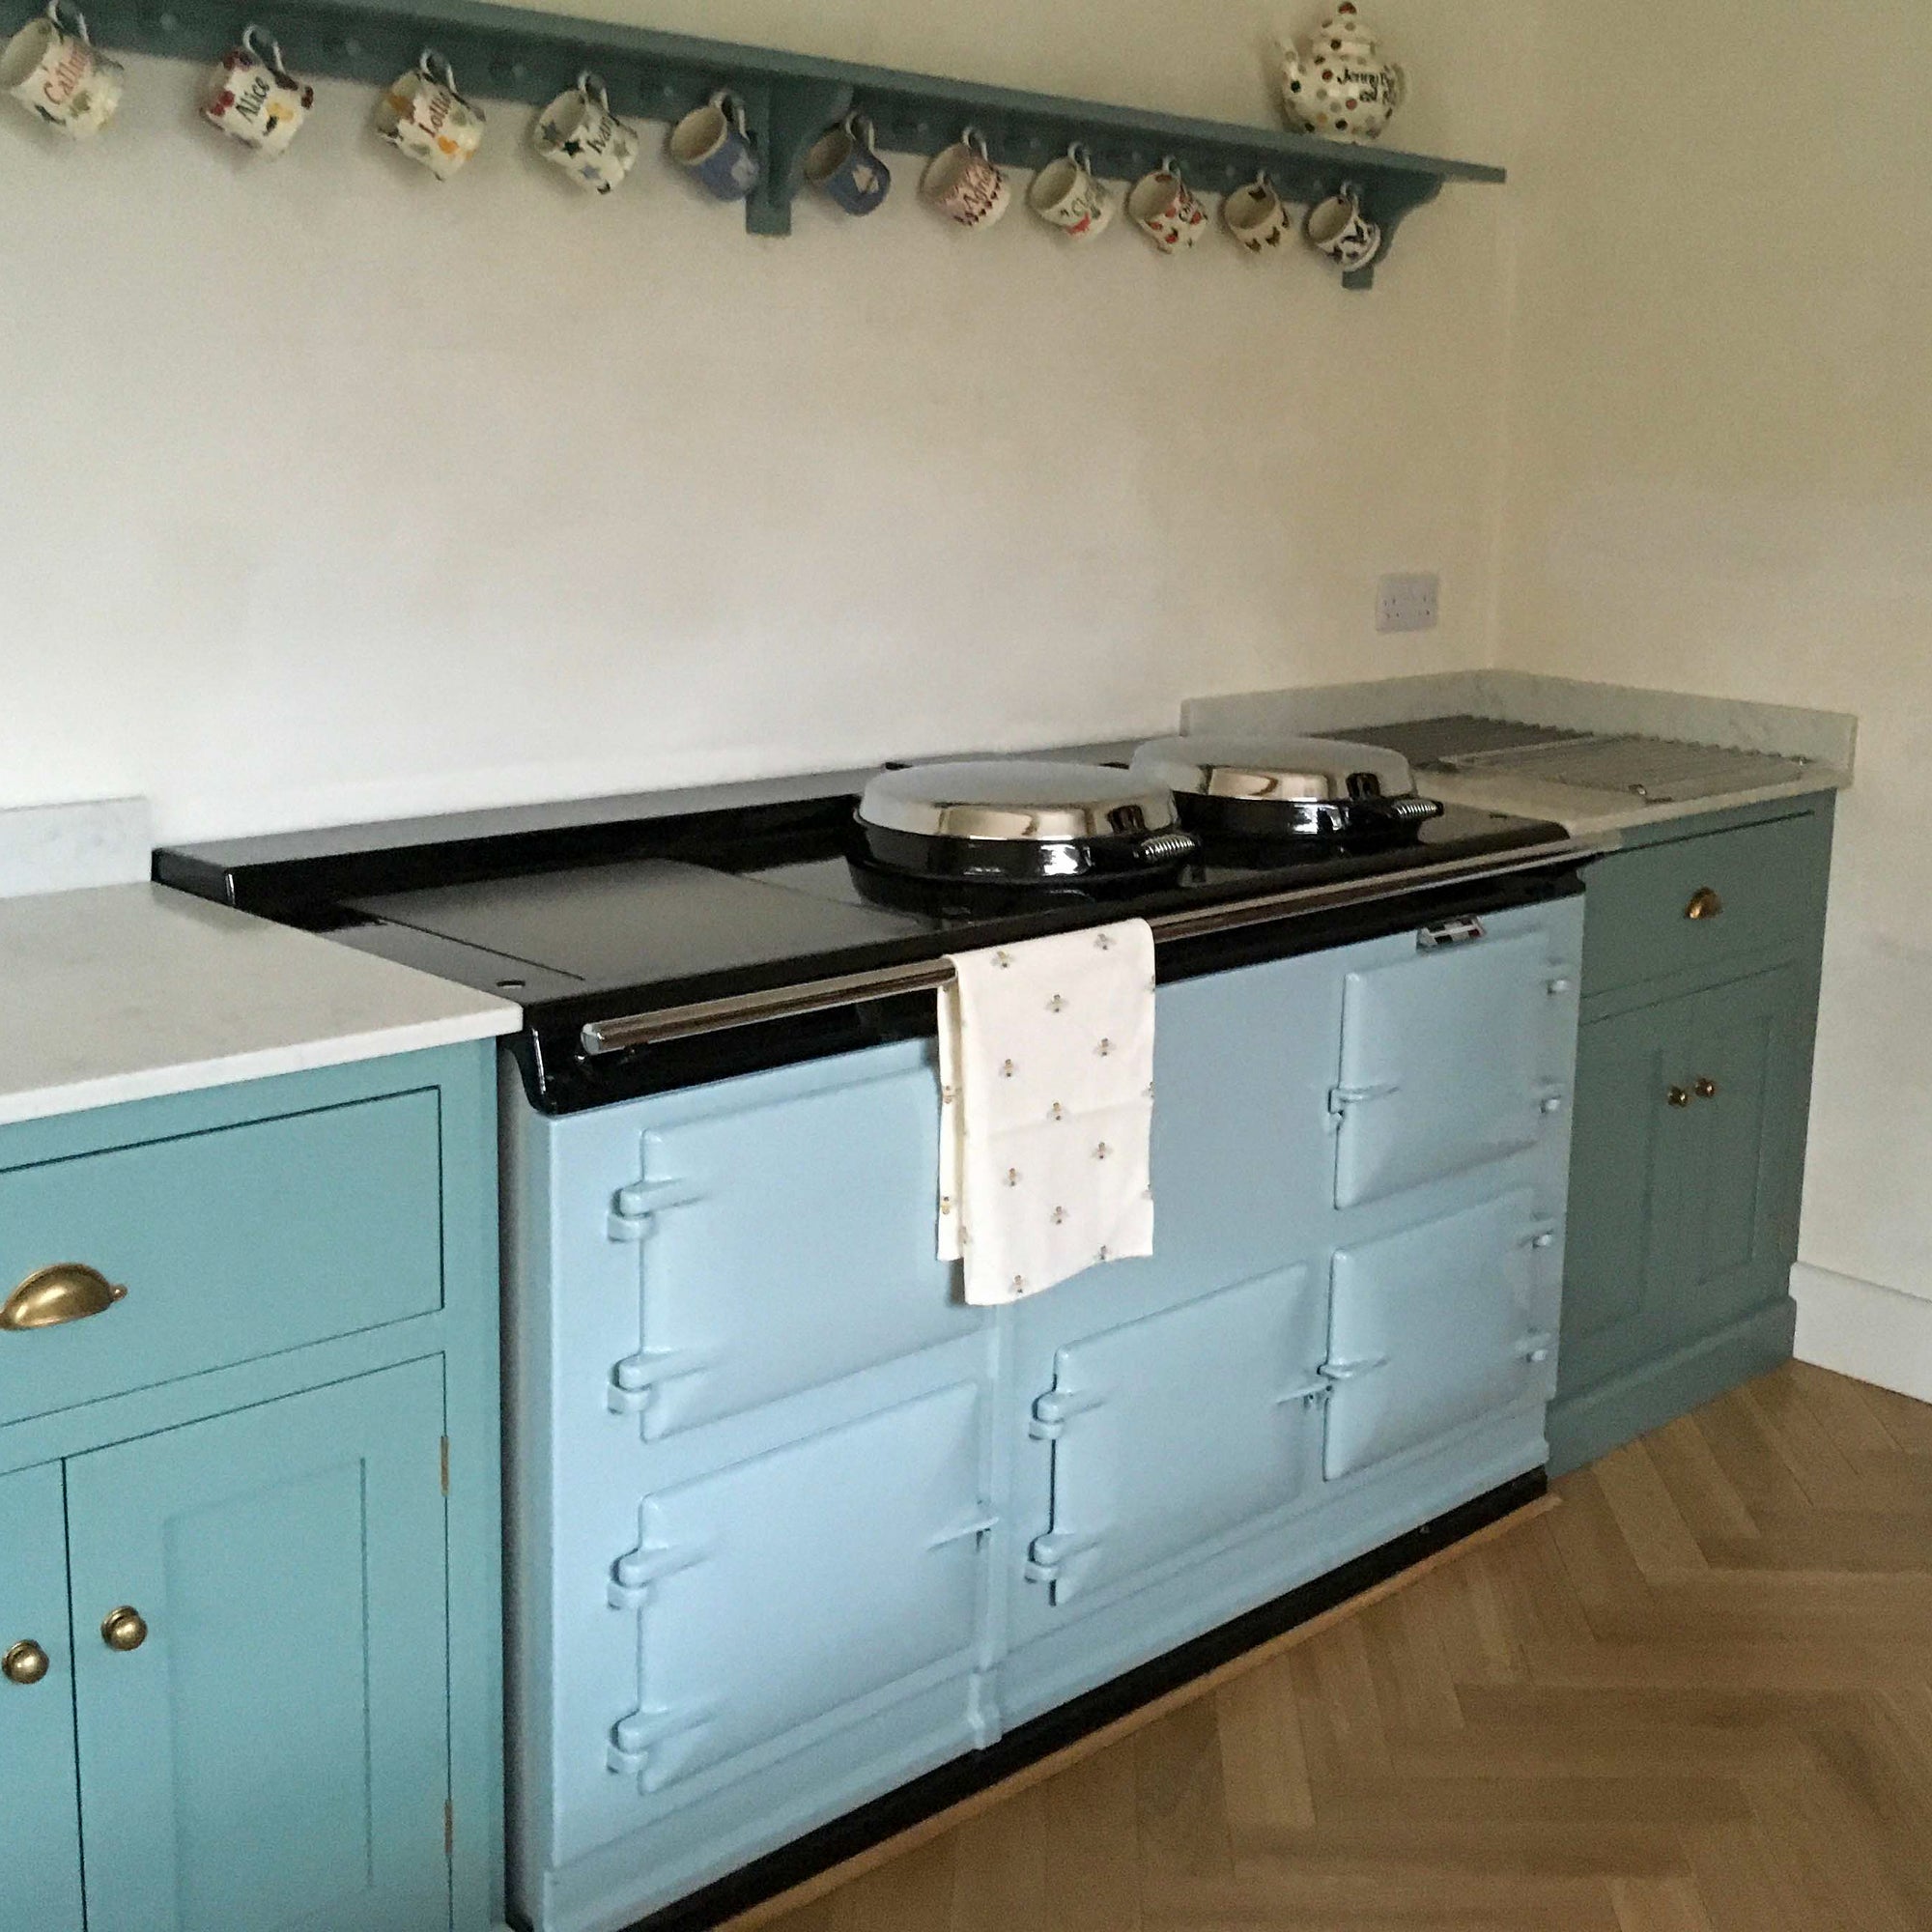 "Our Lovely Aga" - Re-enamelled, Moved & Converted